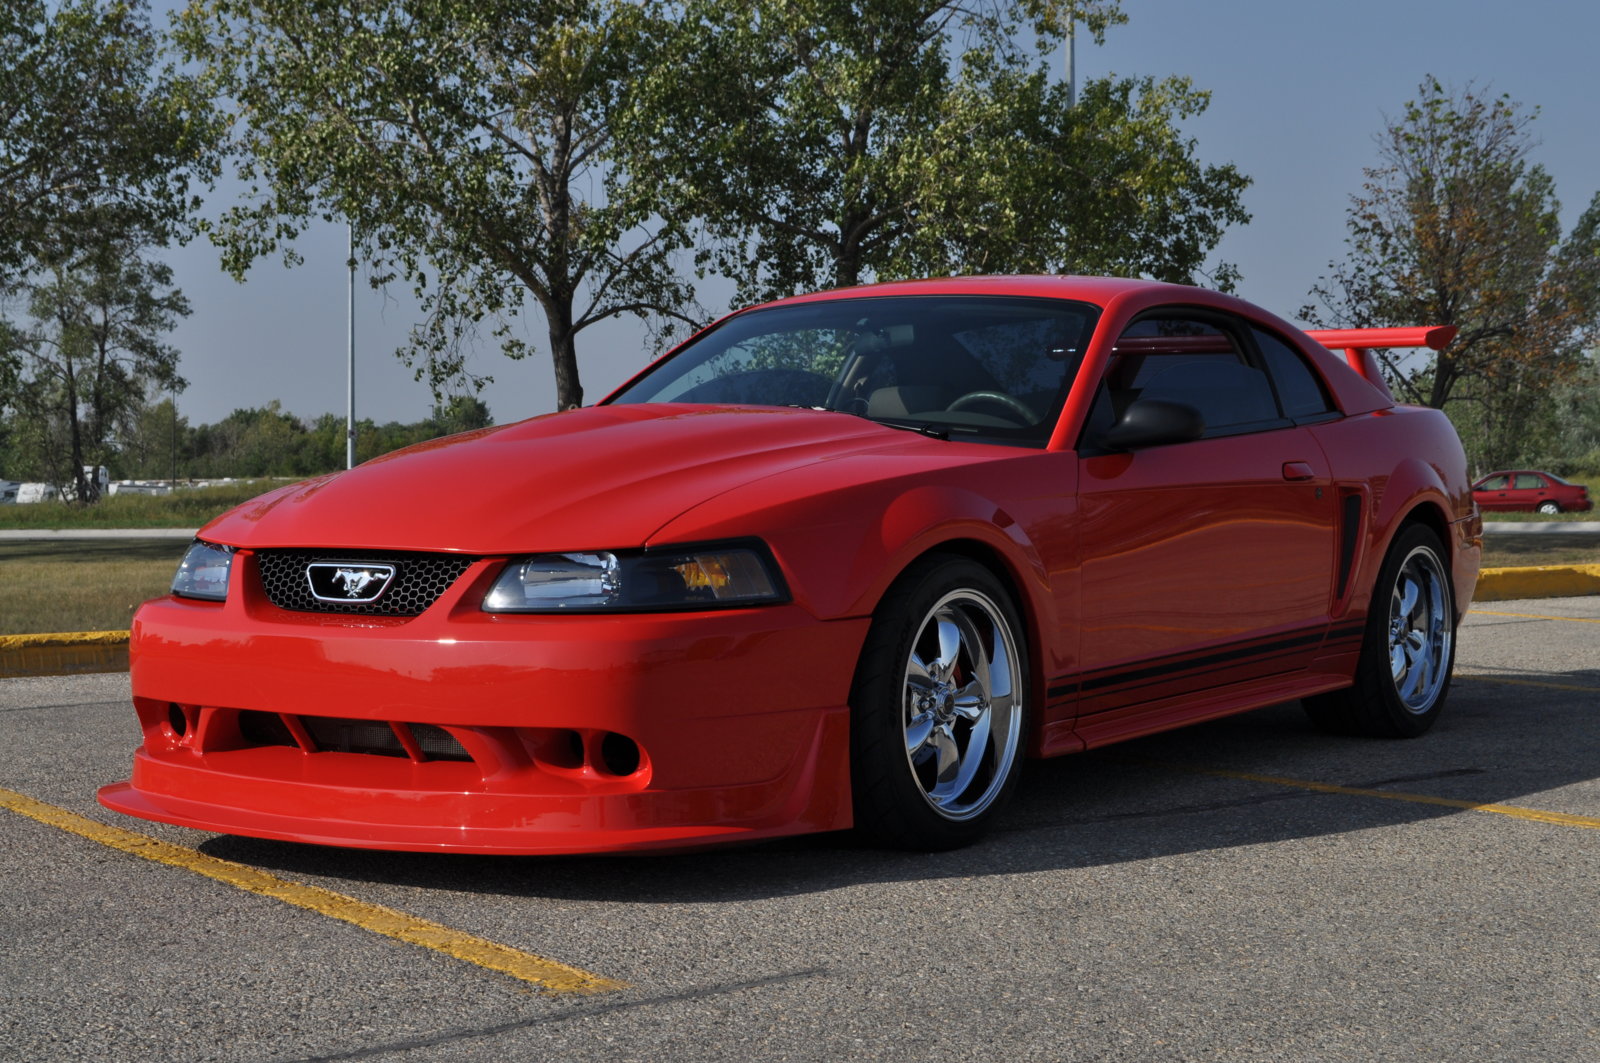 Fs Mint Custom 2000 Mustang Gt With Under 8000 Miles 2015 S550